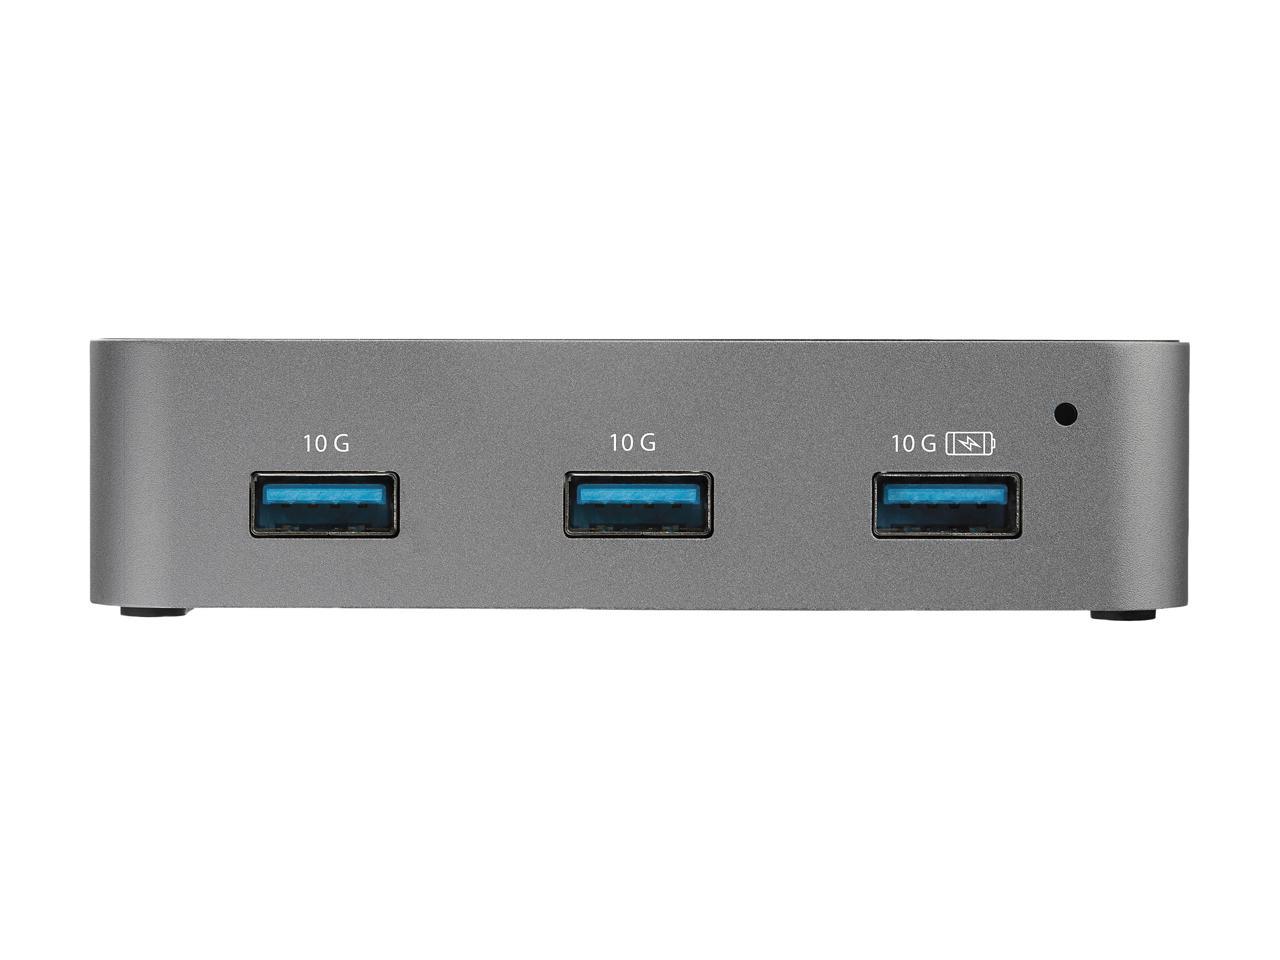 StarTech.com 4 Port USB C Hub with Power Adapter - USB 3.2 Gen 2 (10Gbps) - USB Type C to 4x USB-A - Self Powered Desktop USB Hub with Fast Charging Port (BC 1.2) - Desk Mountable - image 4 of 5